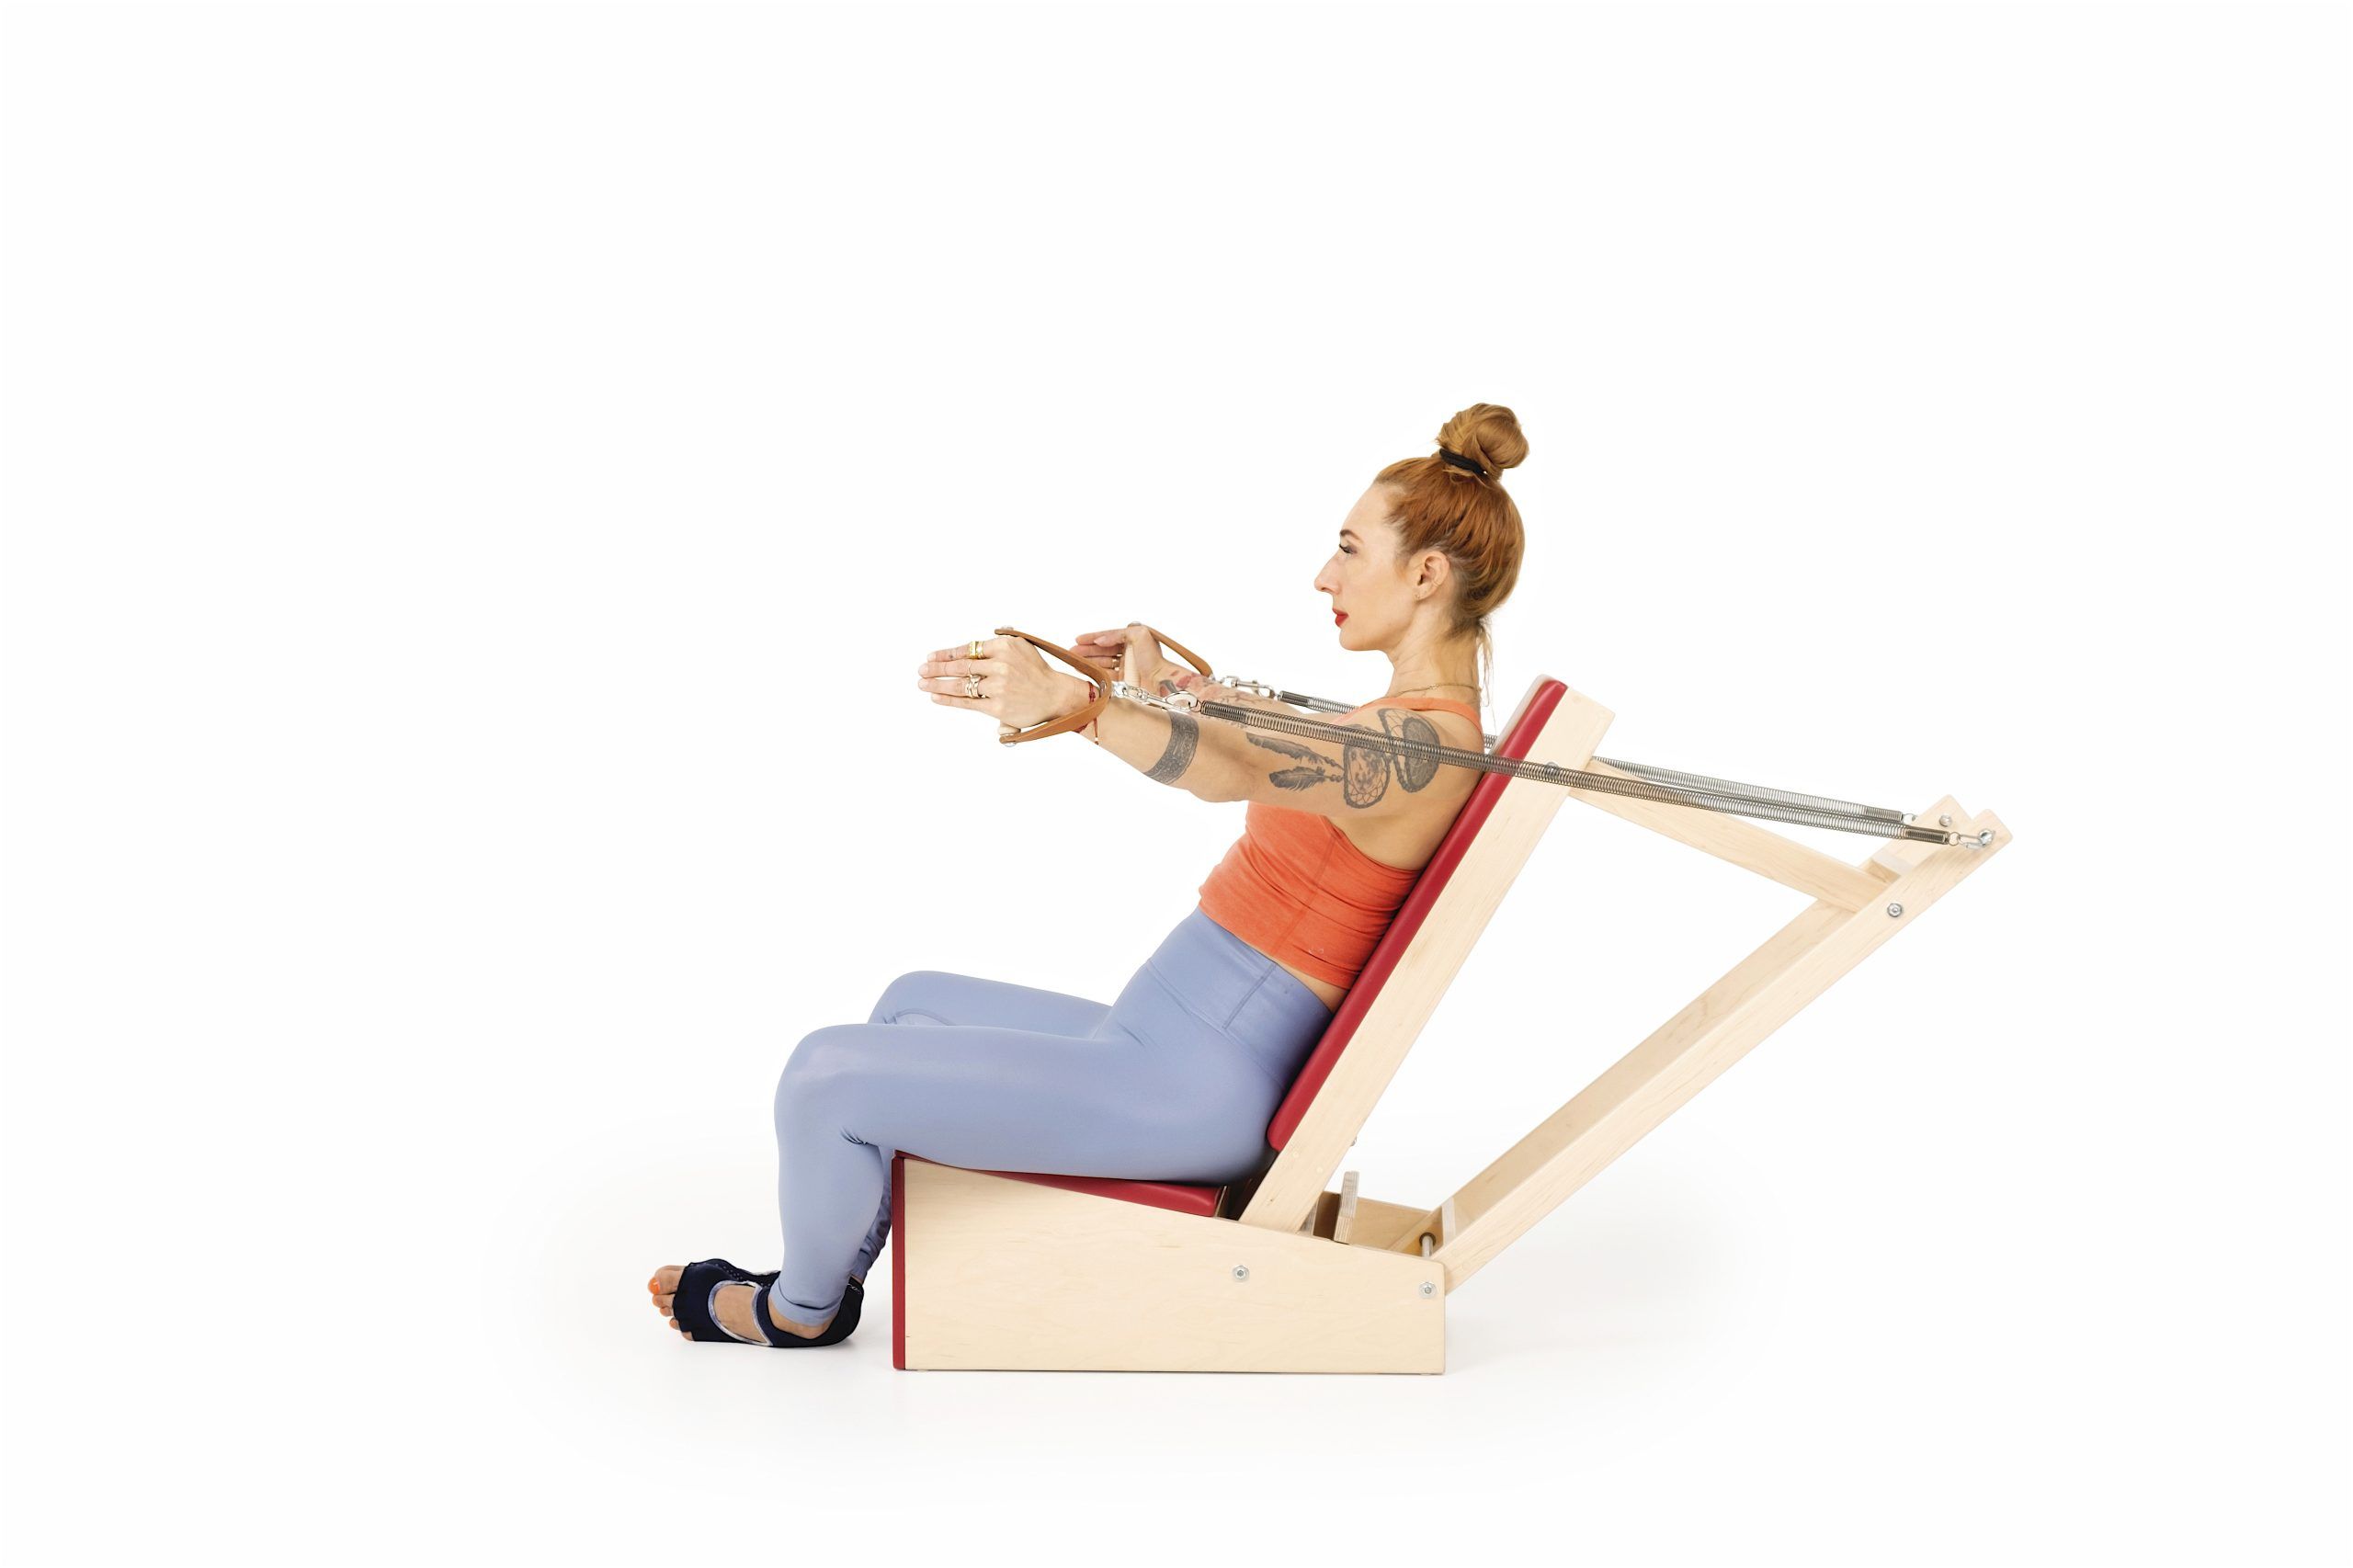 rowing 6 hug on the arm chair online pilates classes